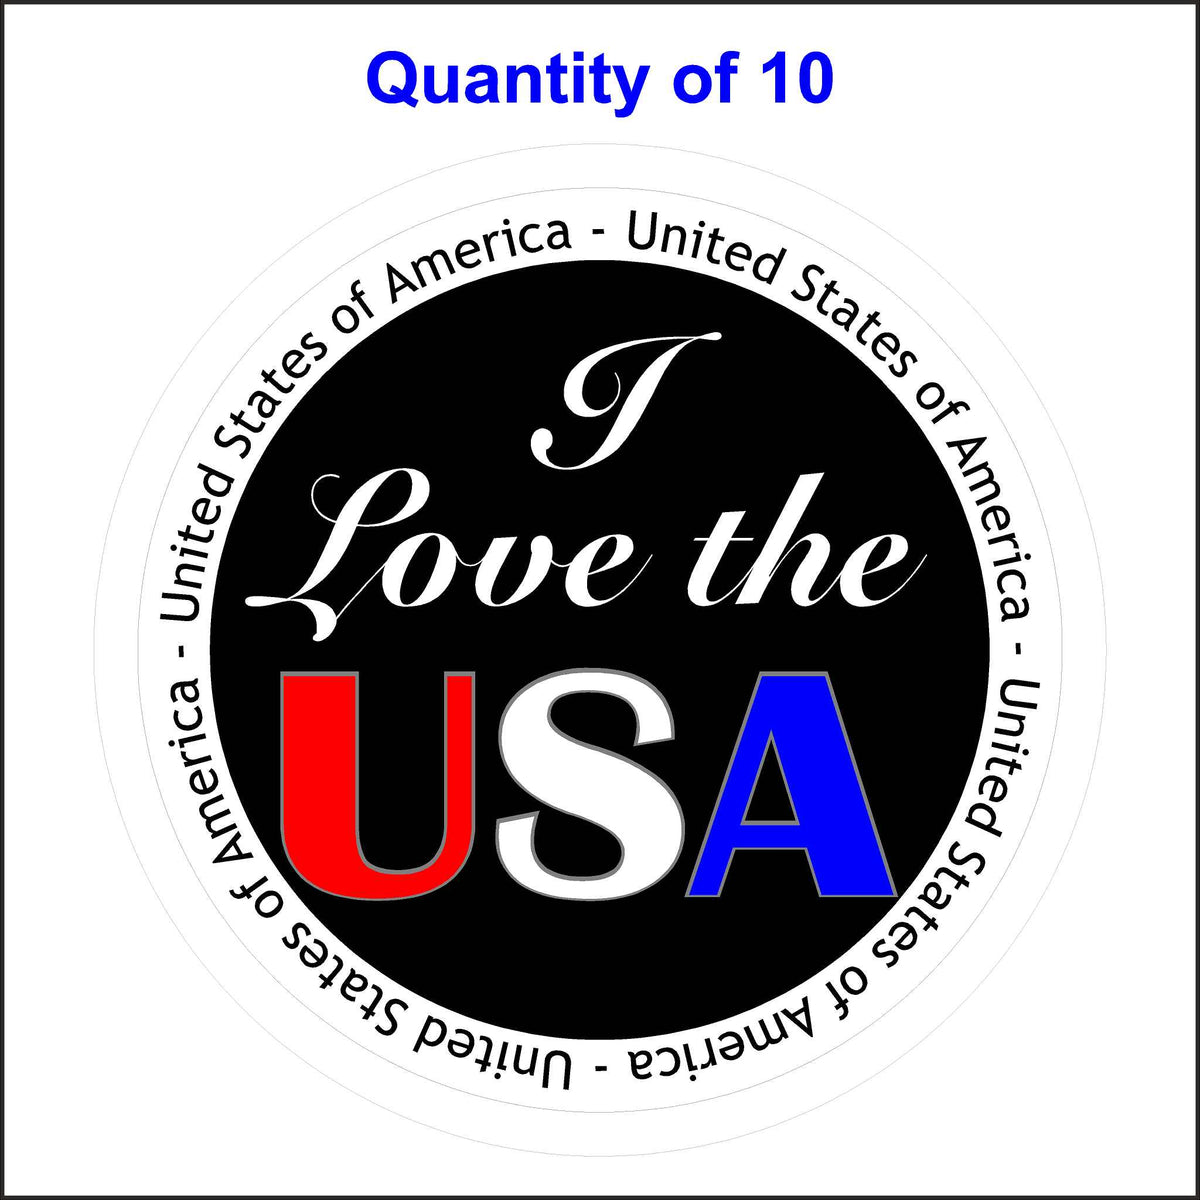 I Love the USA United States of America Sticker. Red, White and Blue Letters on a Black Background. 10 Quantity.